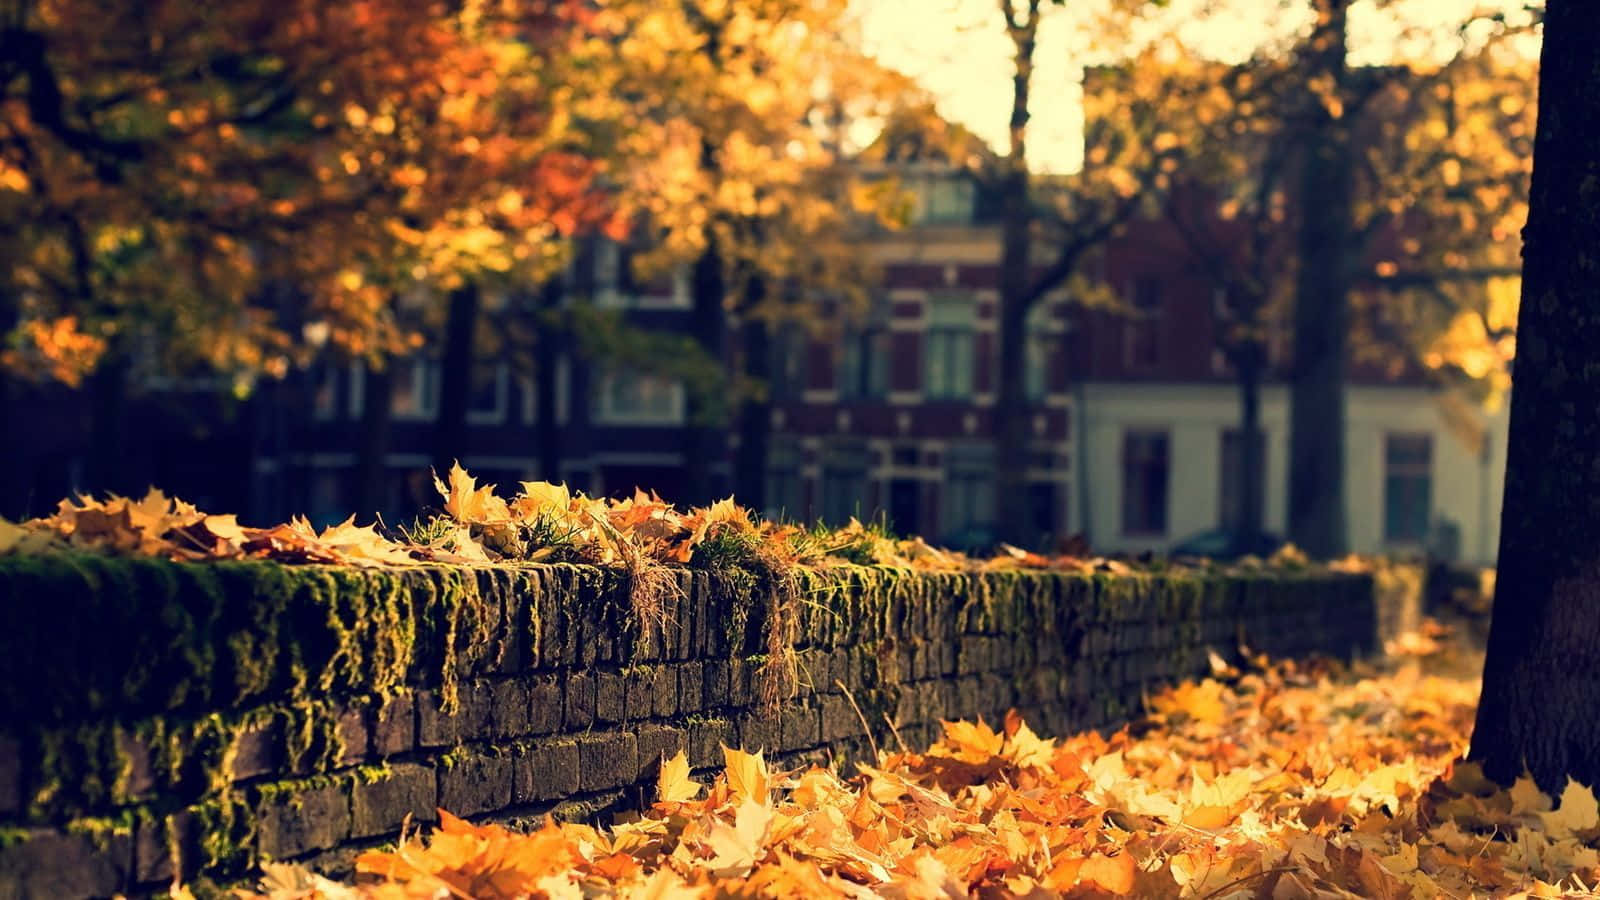 Get Cozy This Fall with this Relaxing Desktop Scene Wallpaper